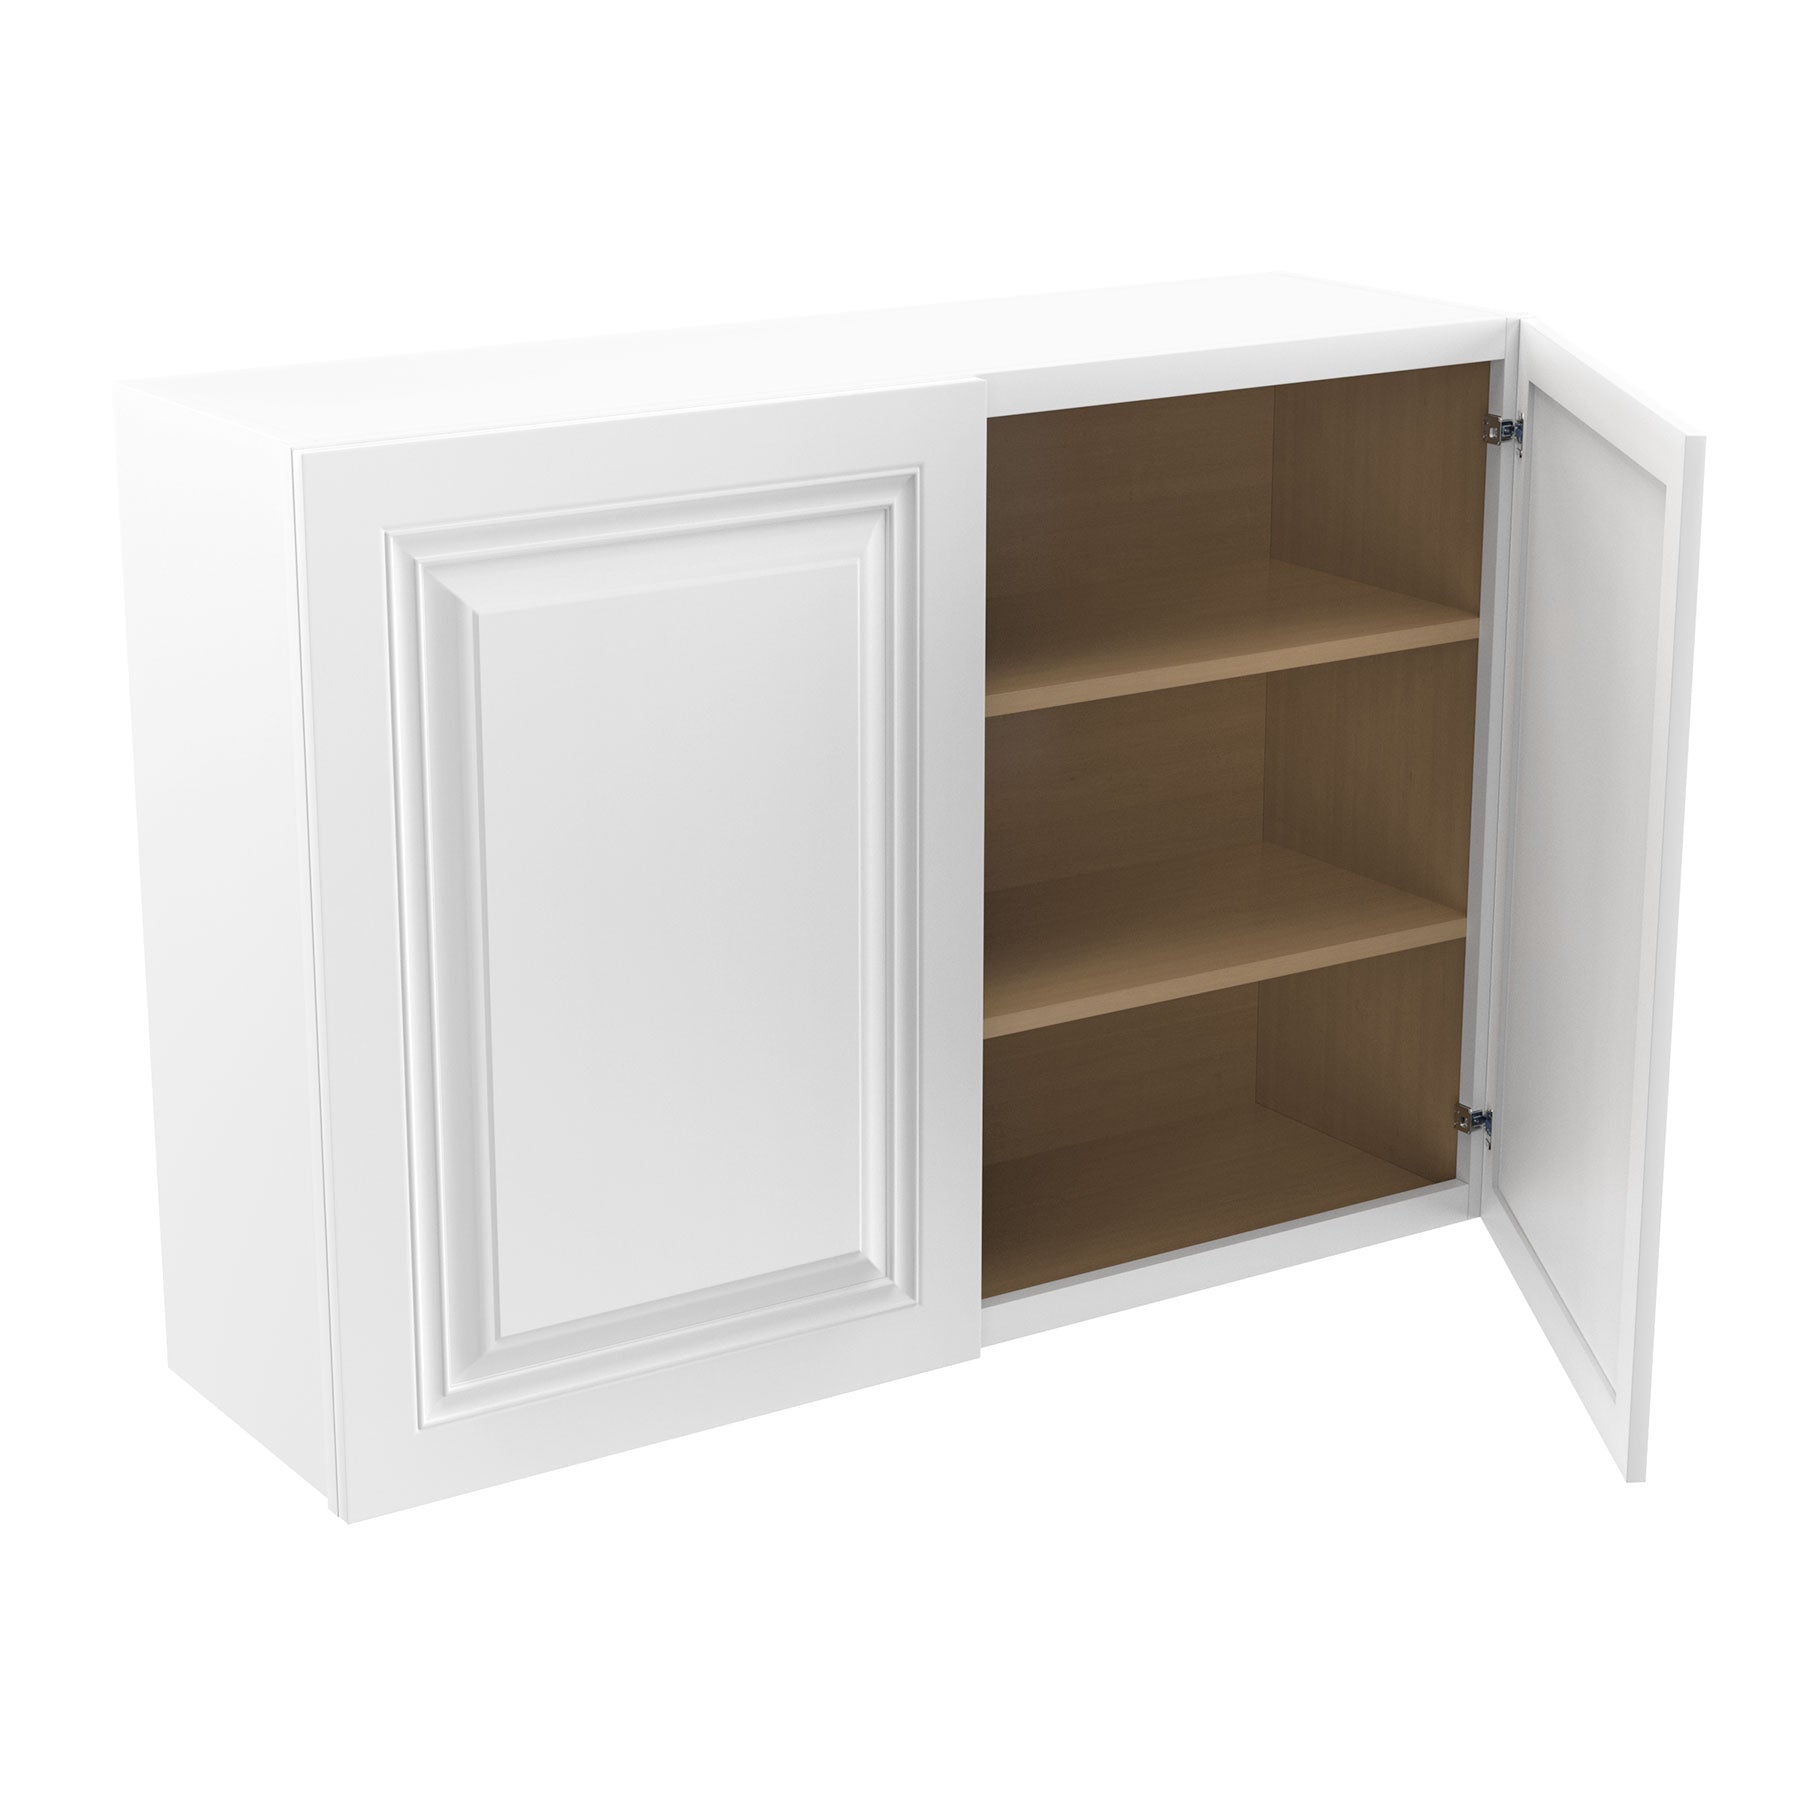 RTA - Park Avenue White - 30" High Double Door Wall Cabinet | 42"W x 30"H x 12"D